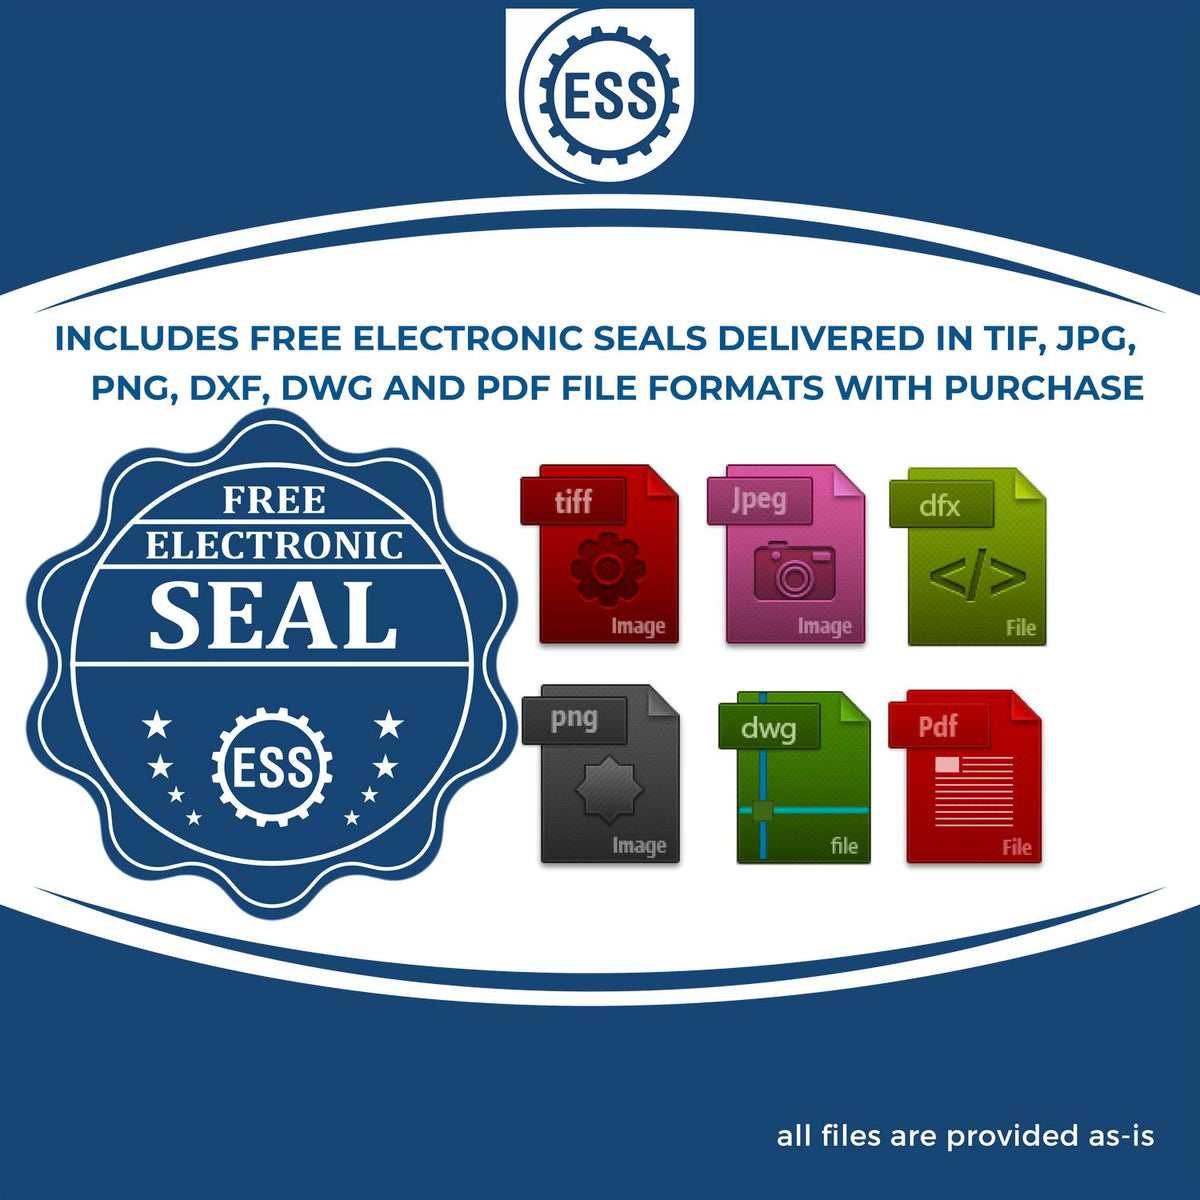 An infographic for the free electronic seal for the Soft New Hampshire Professional Geologist Seal illustrating the different file type icons such as DXF, DWG, TIF, JPG and PNG.